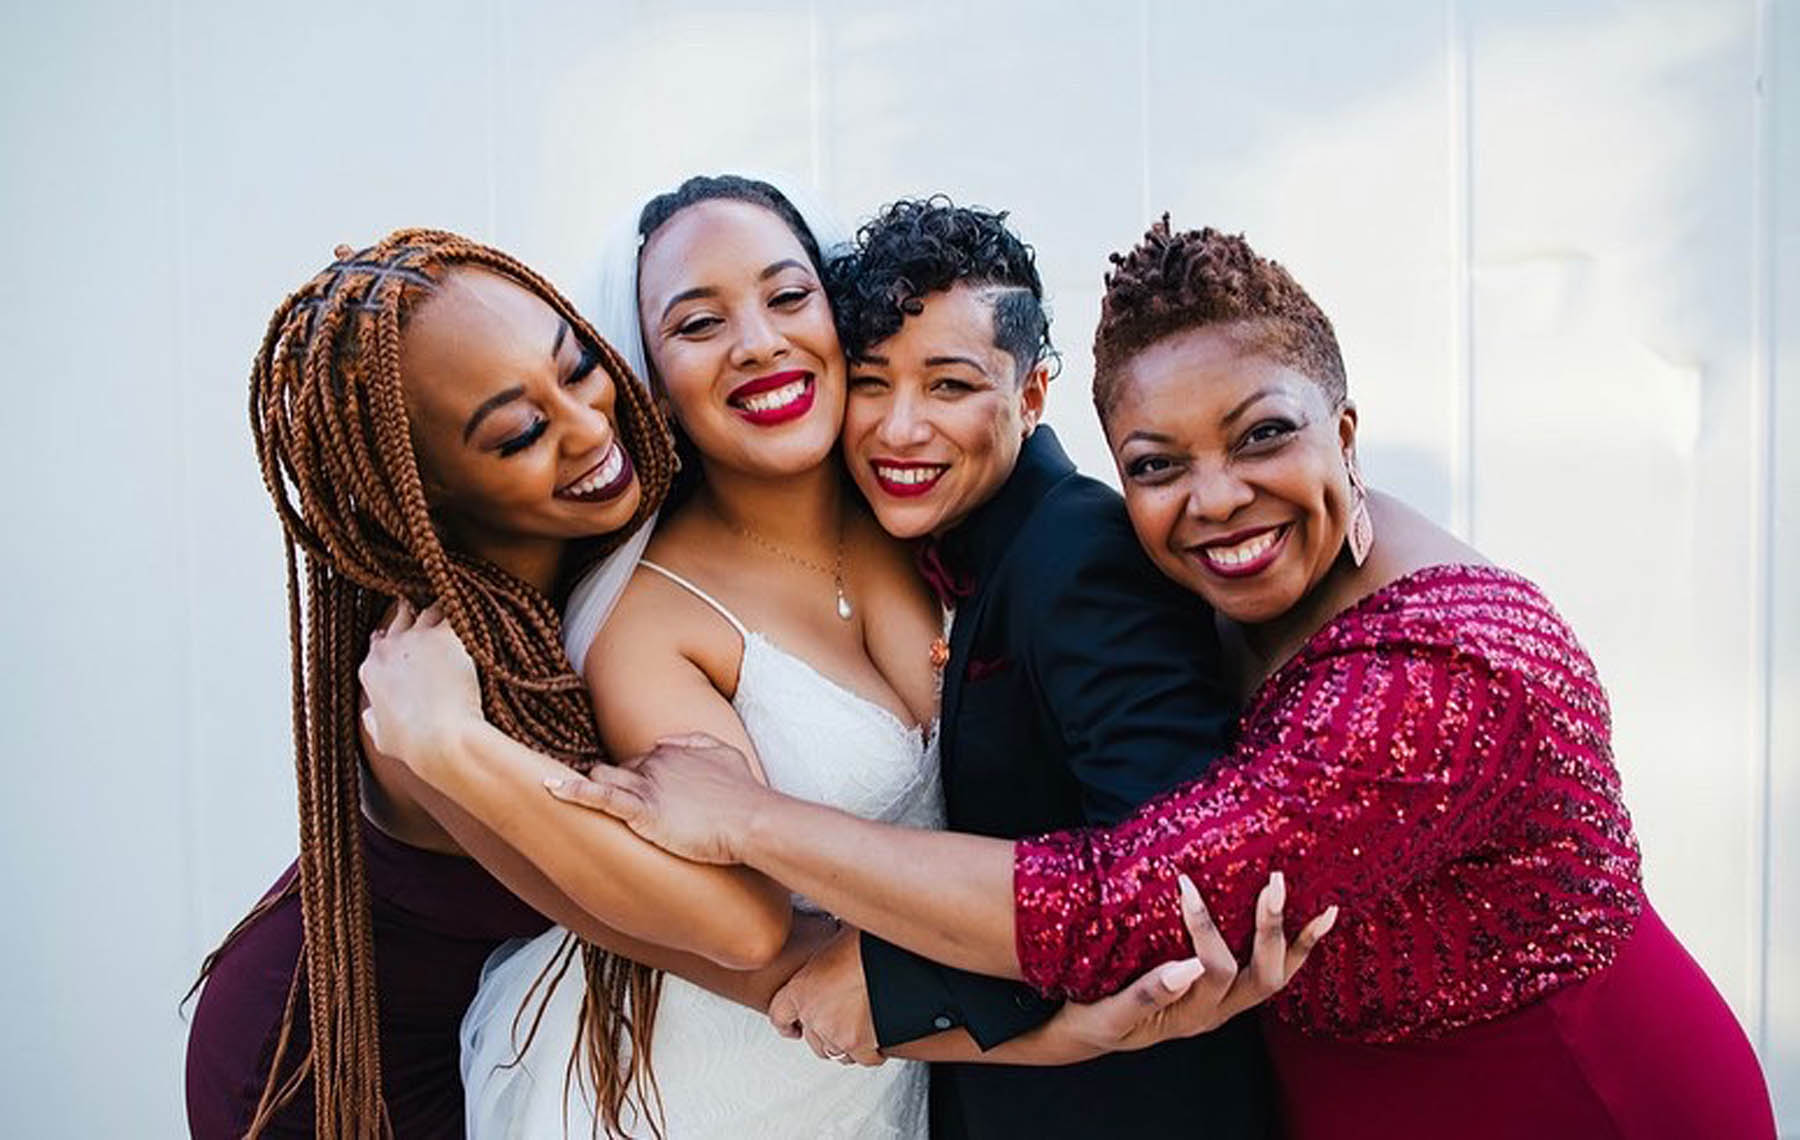 A group of four black women stand embracing in front of a white background.